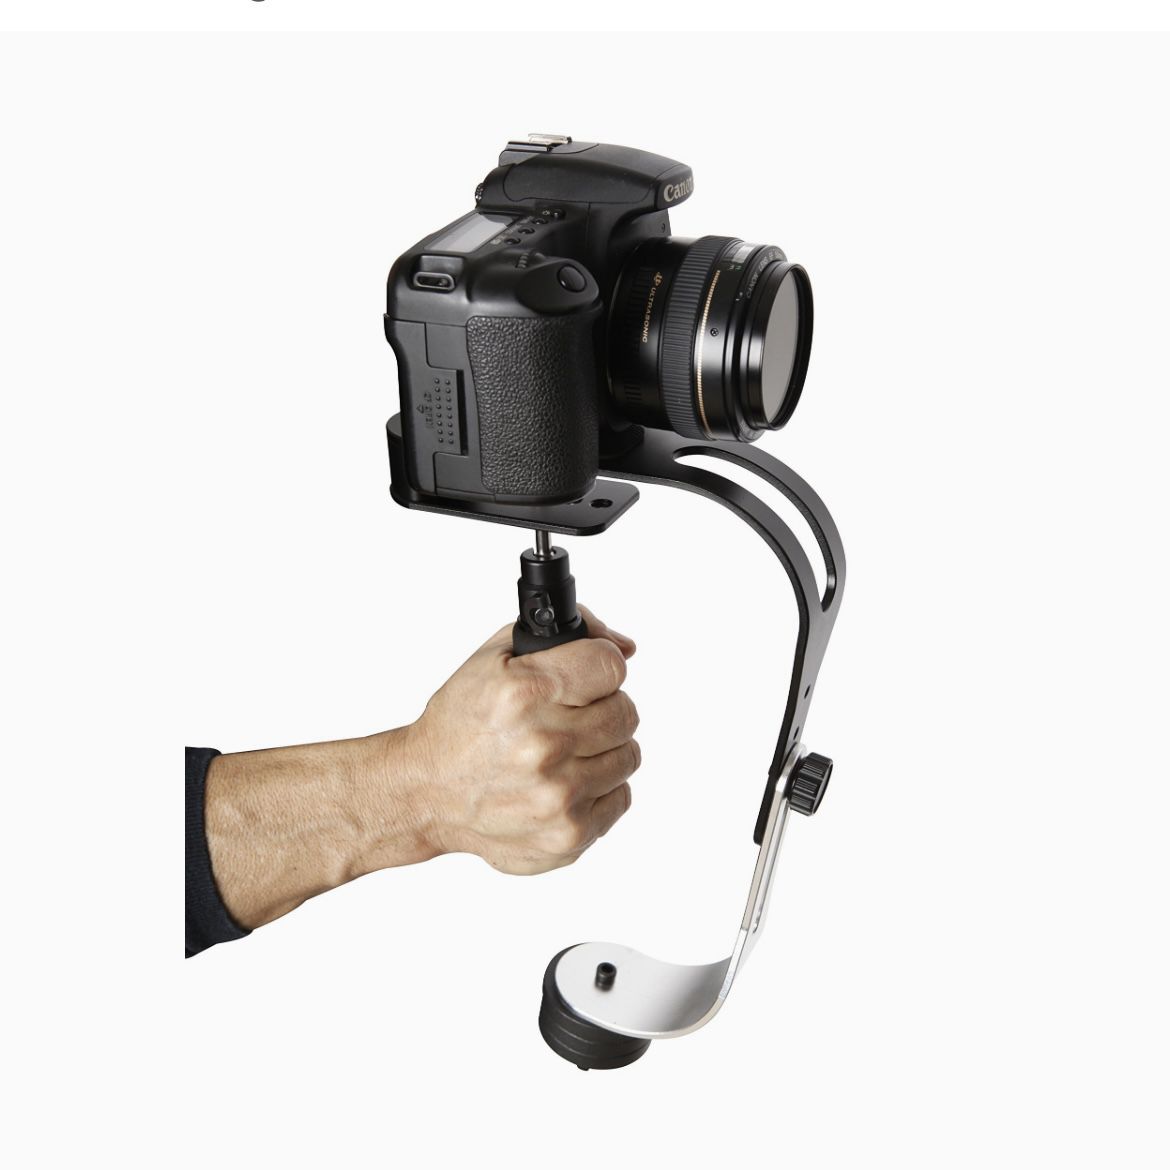 New Pro Video Stabilizer For DSLR Camera